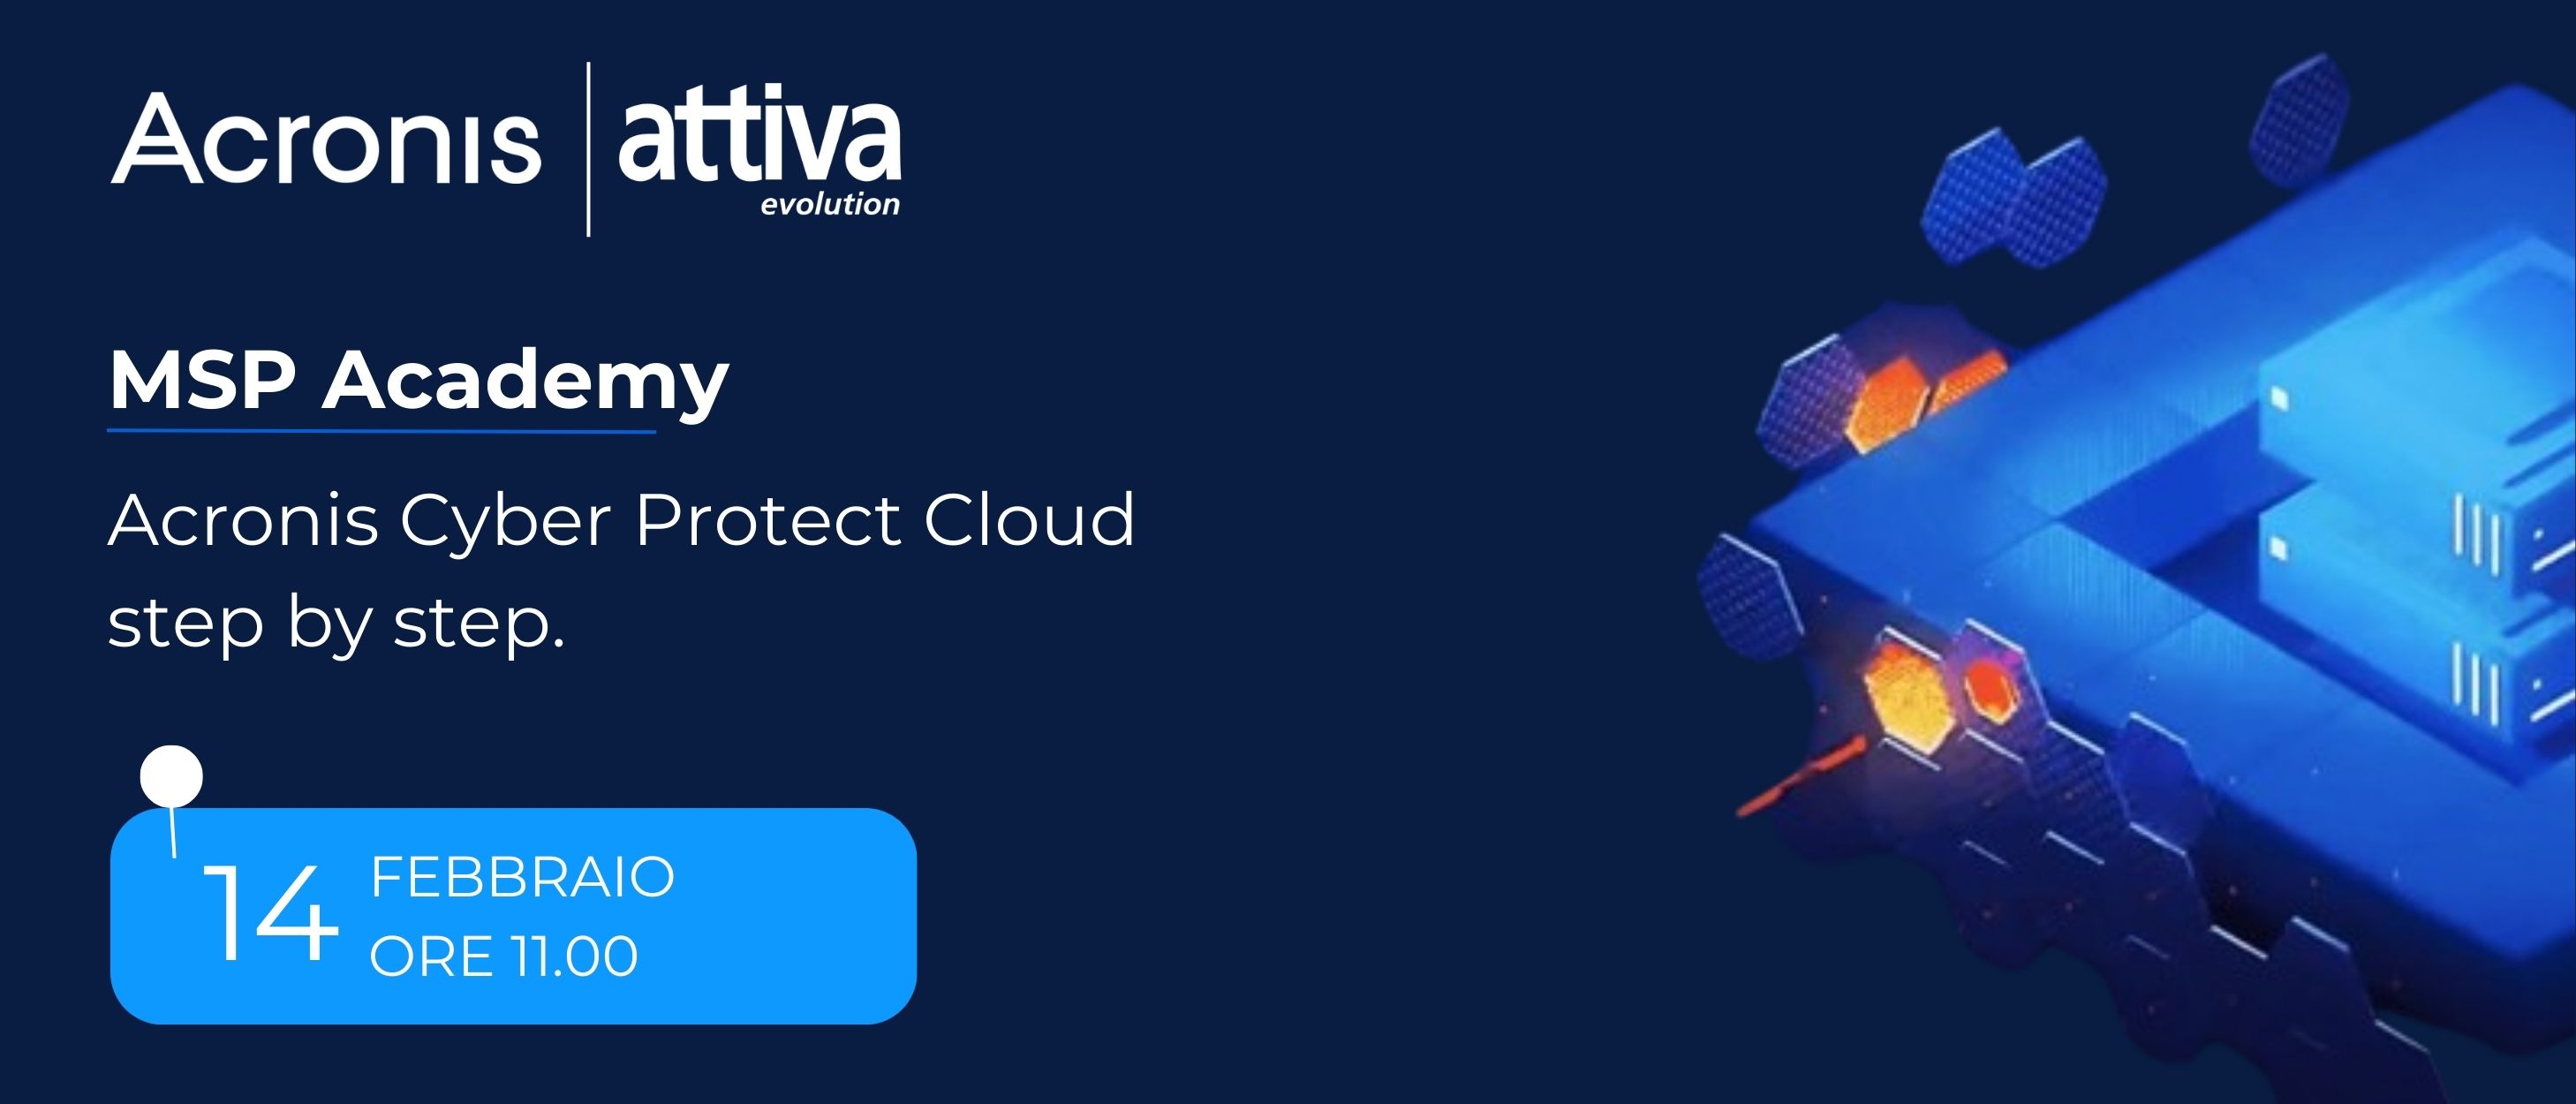 Acronis Cyber Protect Cloud step by step. Prime operazioni in console e Disaster Recovery